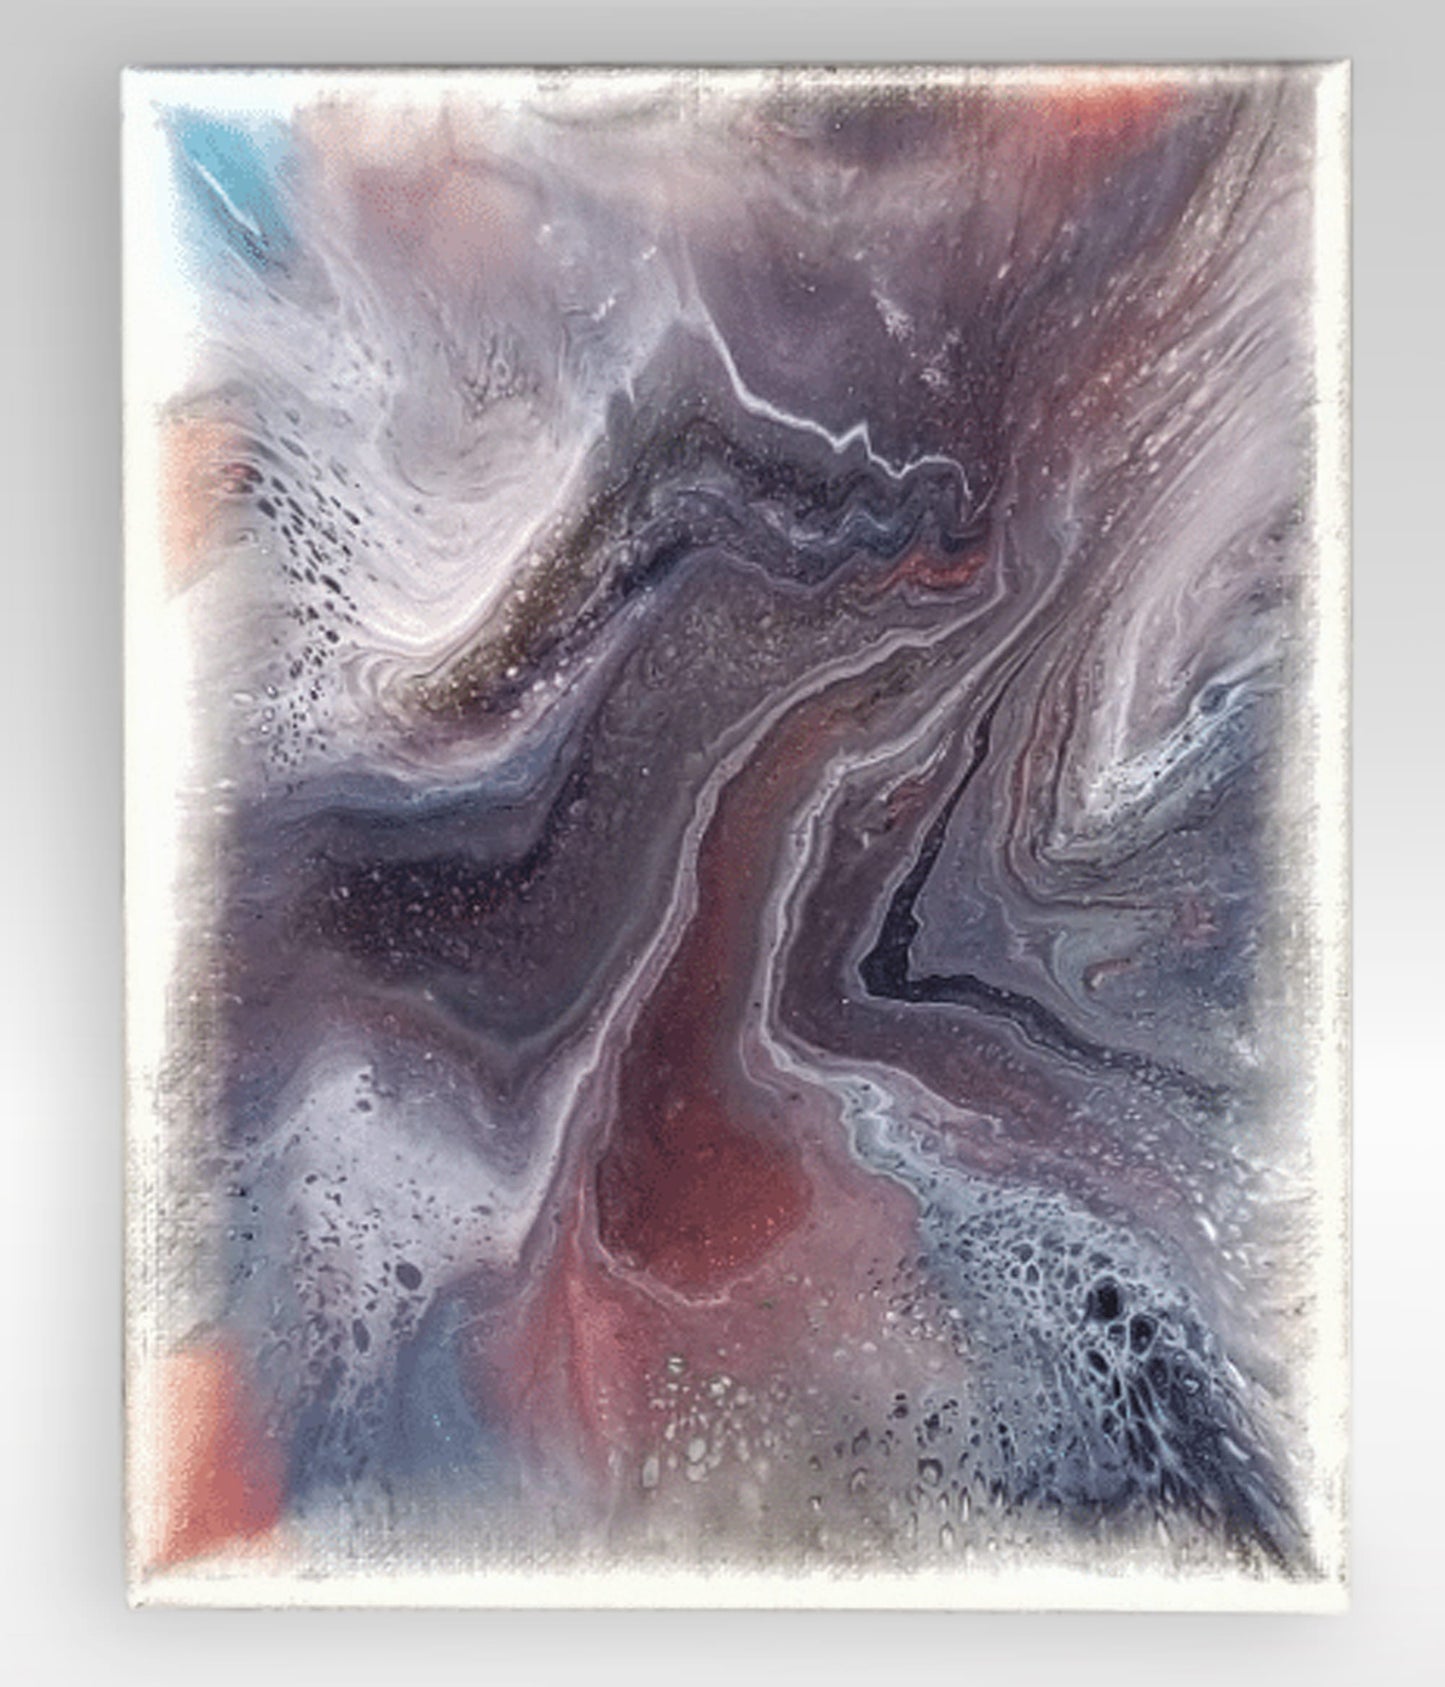 Resin painting on canvas, Resin painting over an acrylic pour